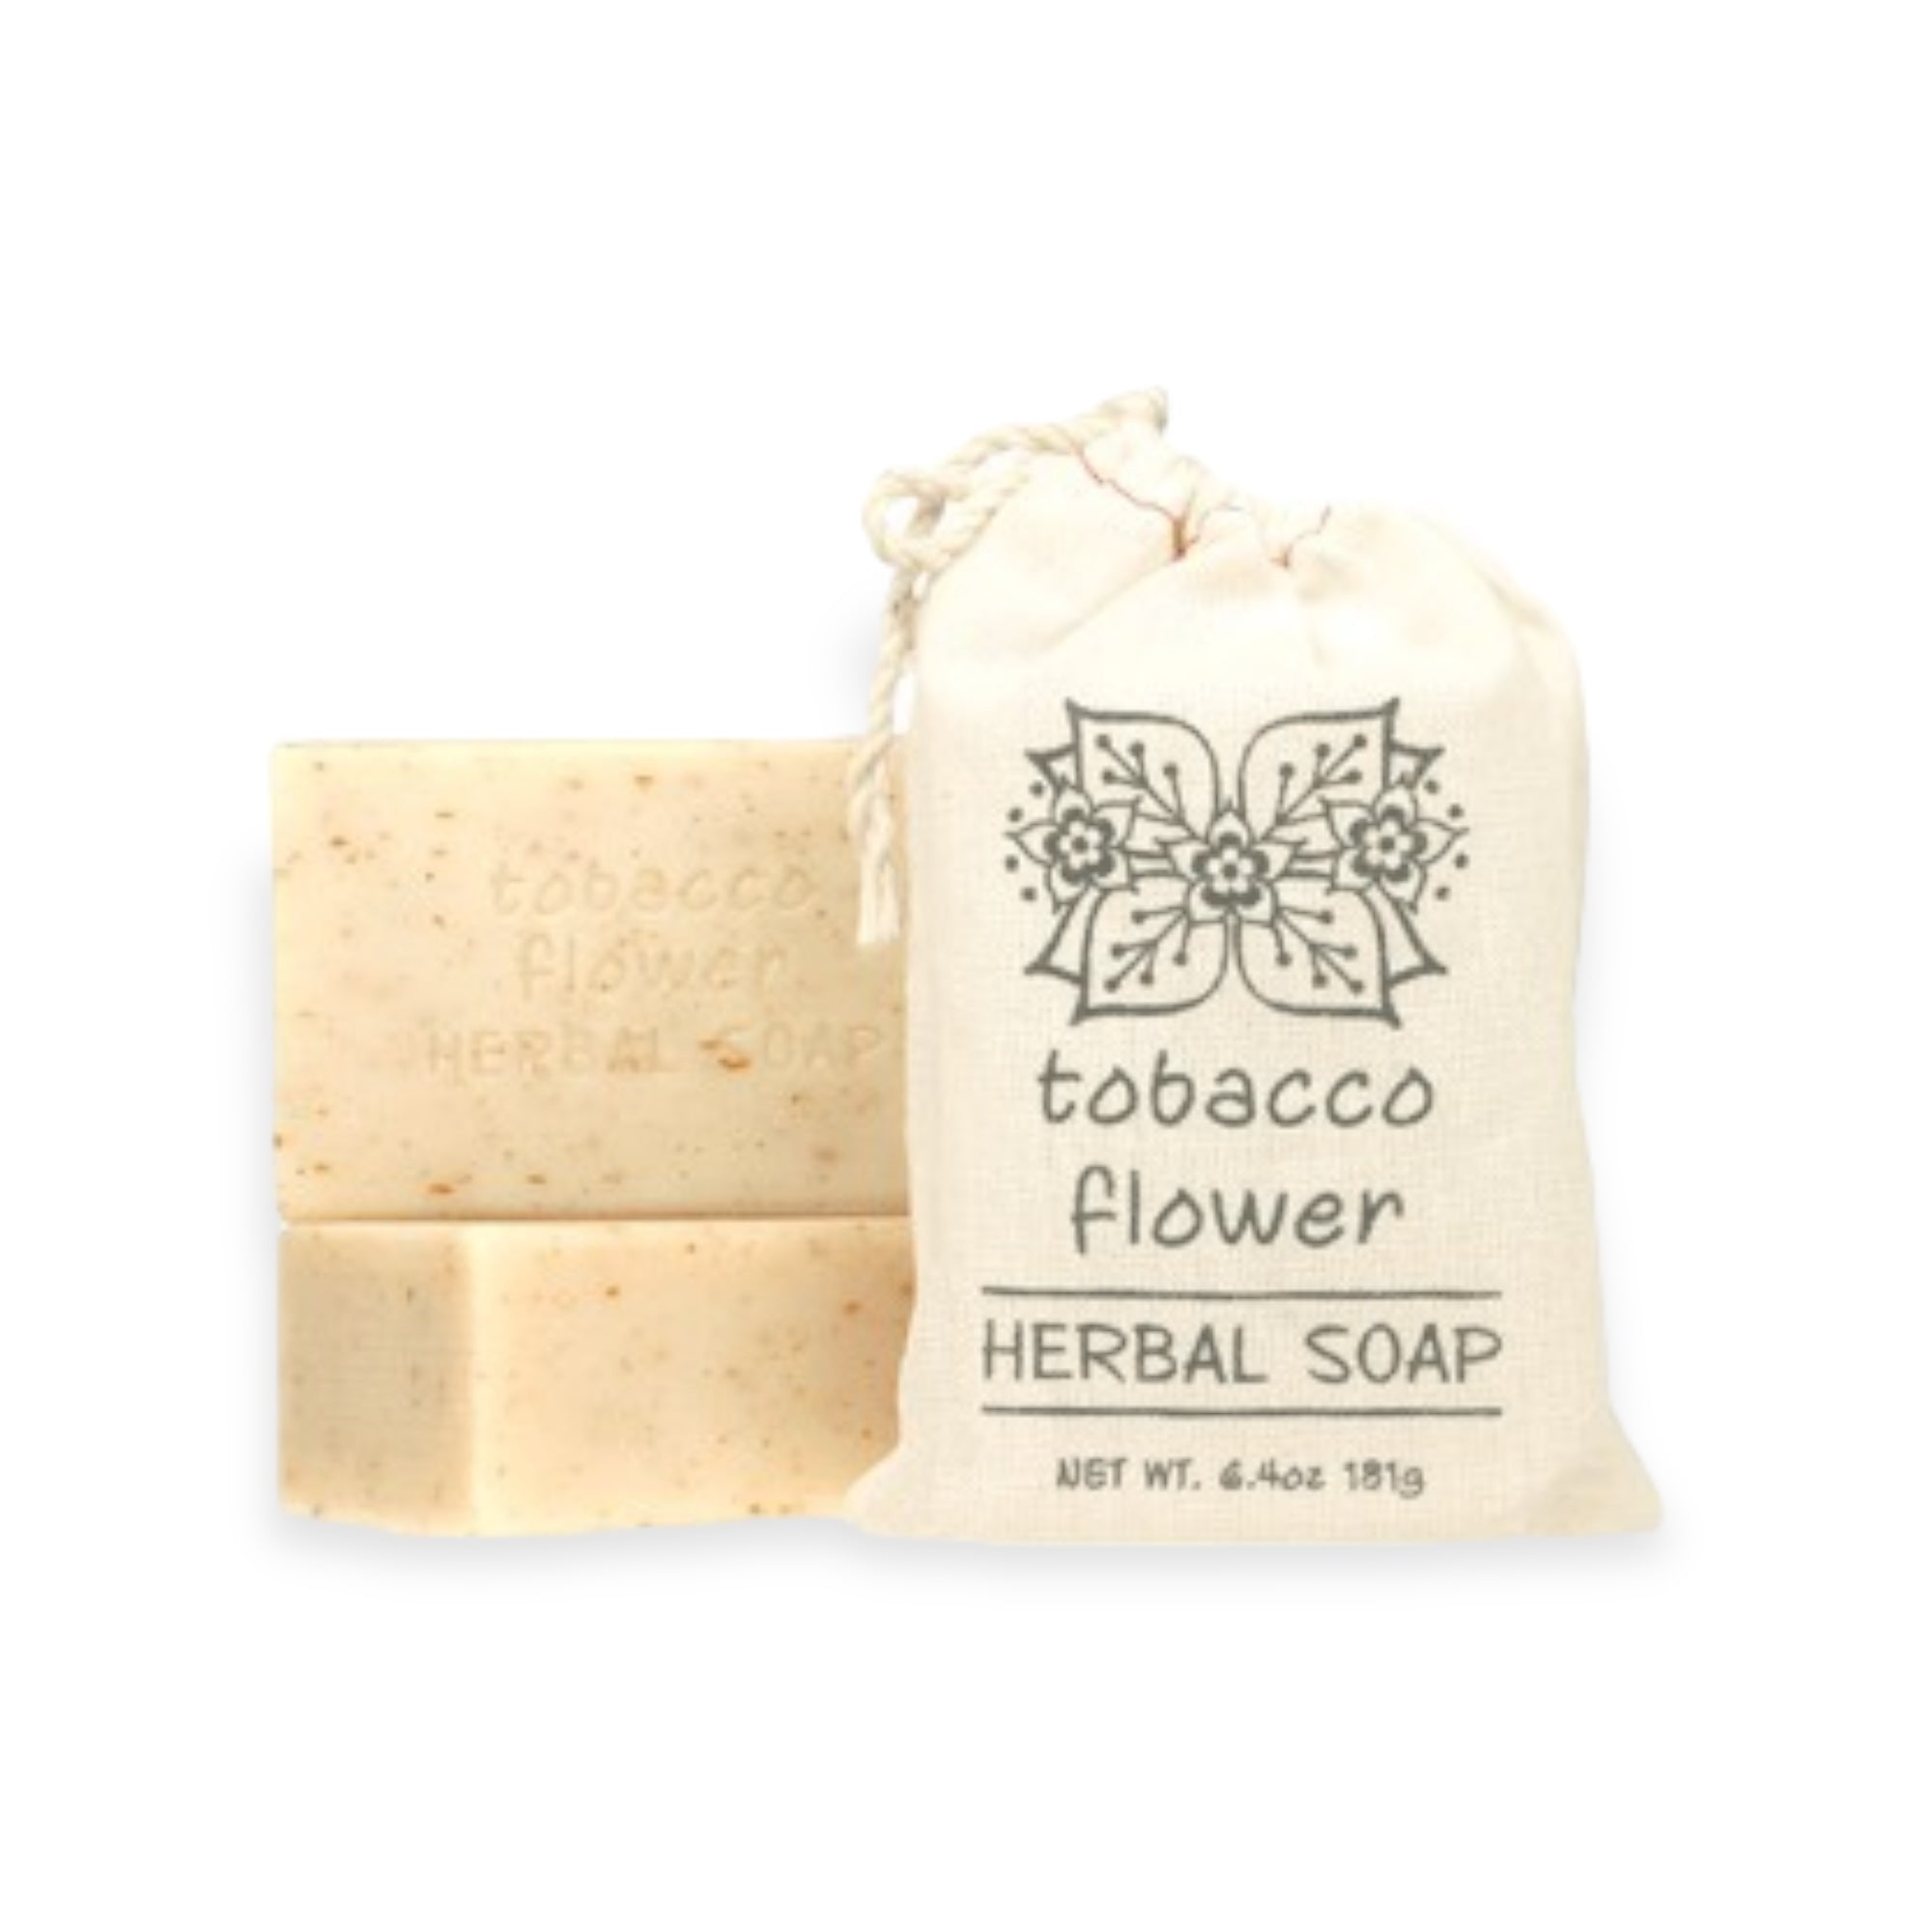 Tobacco Flower Herbal Soap by Greenwich Bay Trading Co.